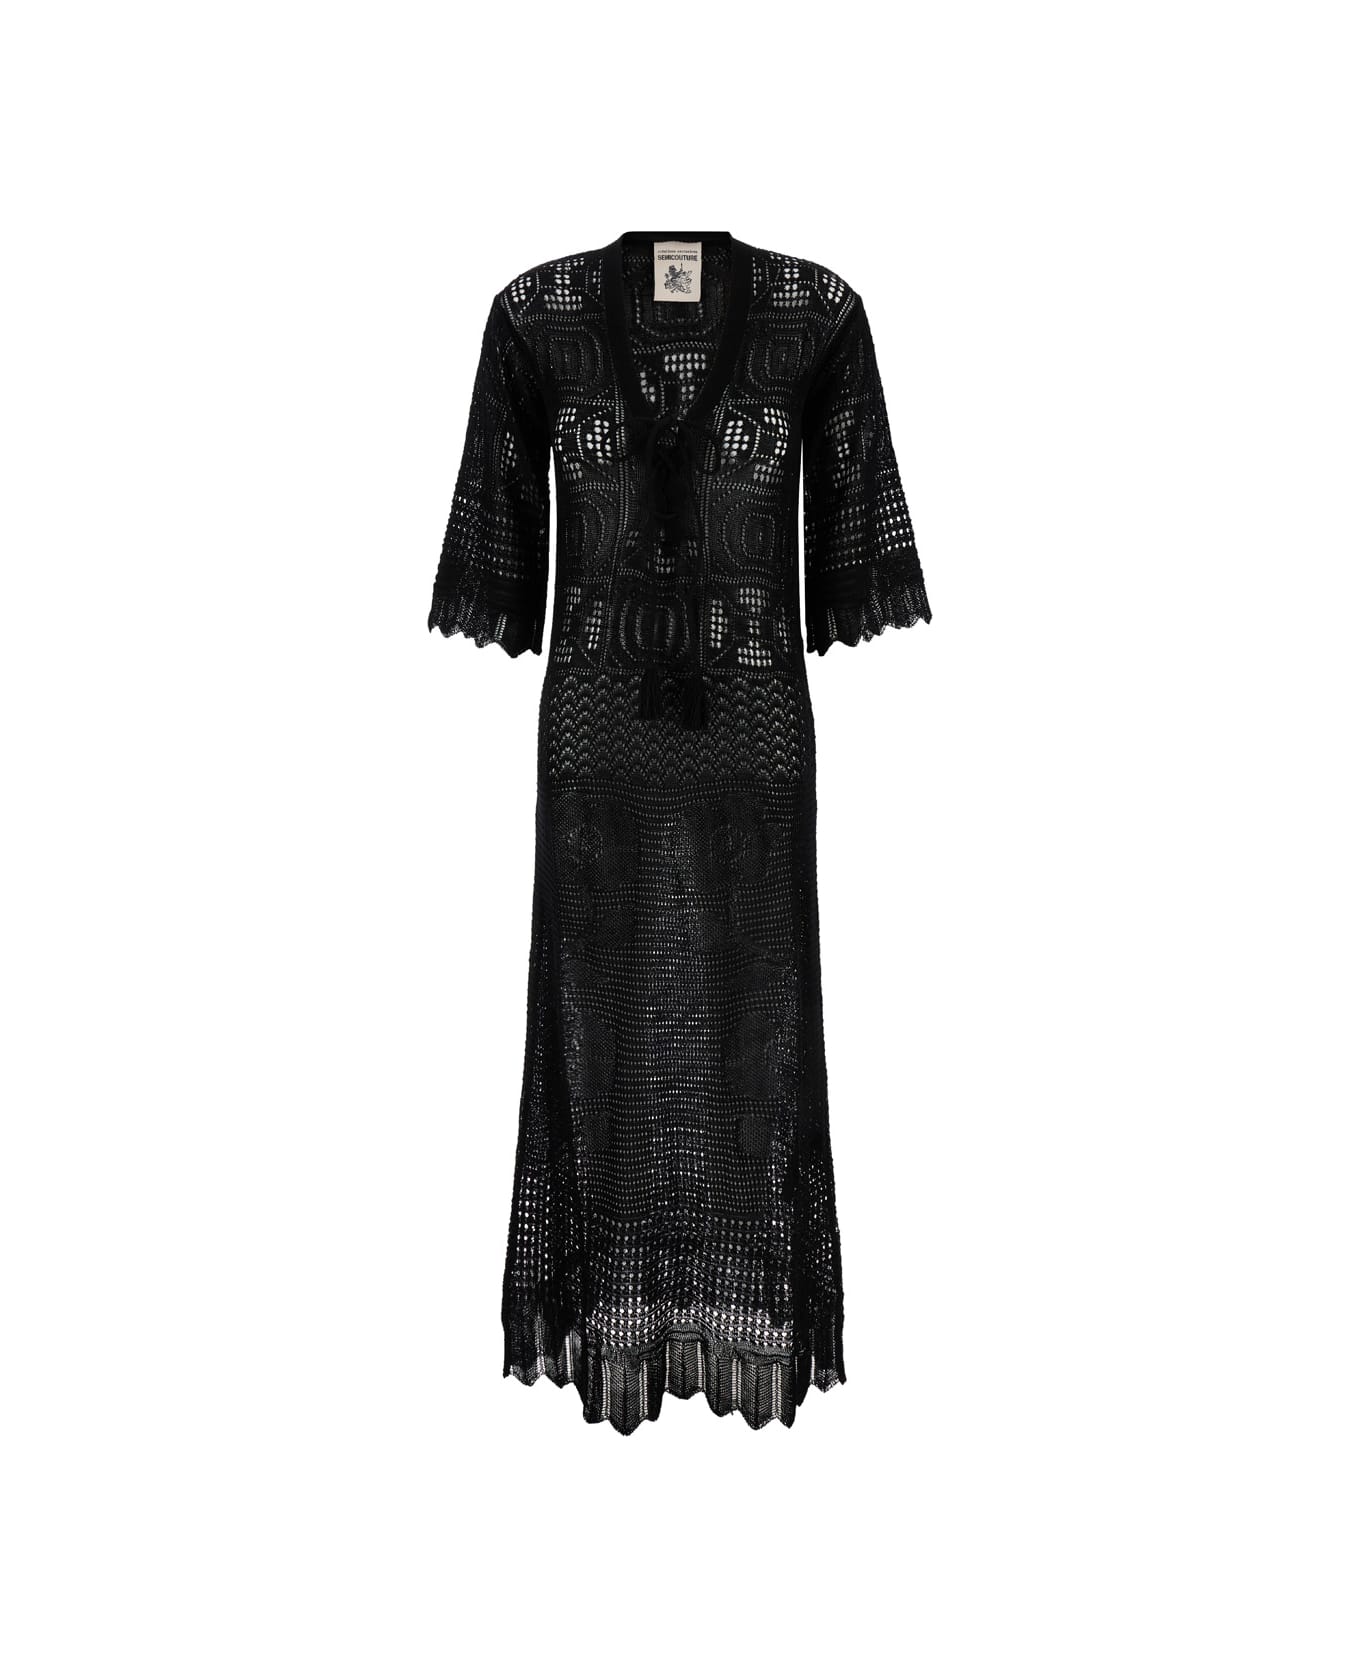 SEMICOUTURE Long Black Dress With Lace-up Closure In Cotton Lace Woman - Black